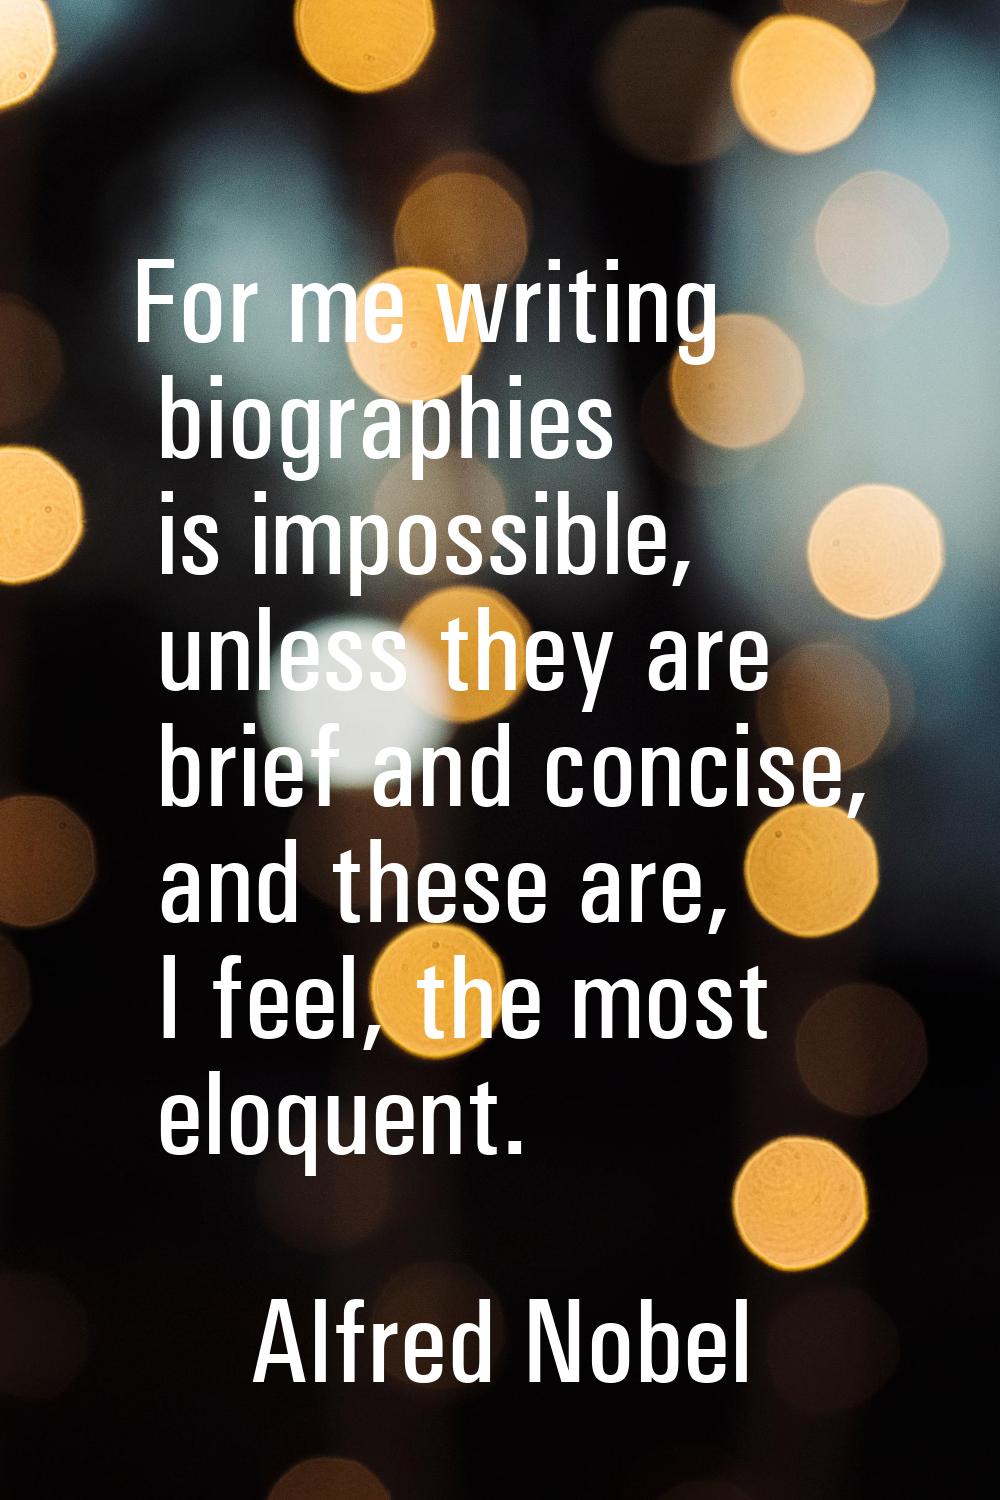 For me writing biographies is impossible, unless they are brief and concise, and these are, I feel,